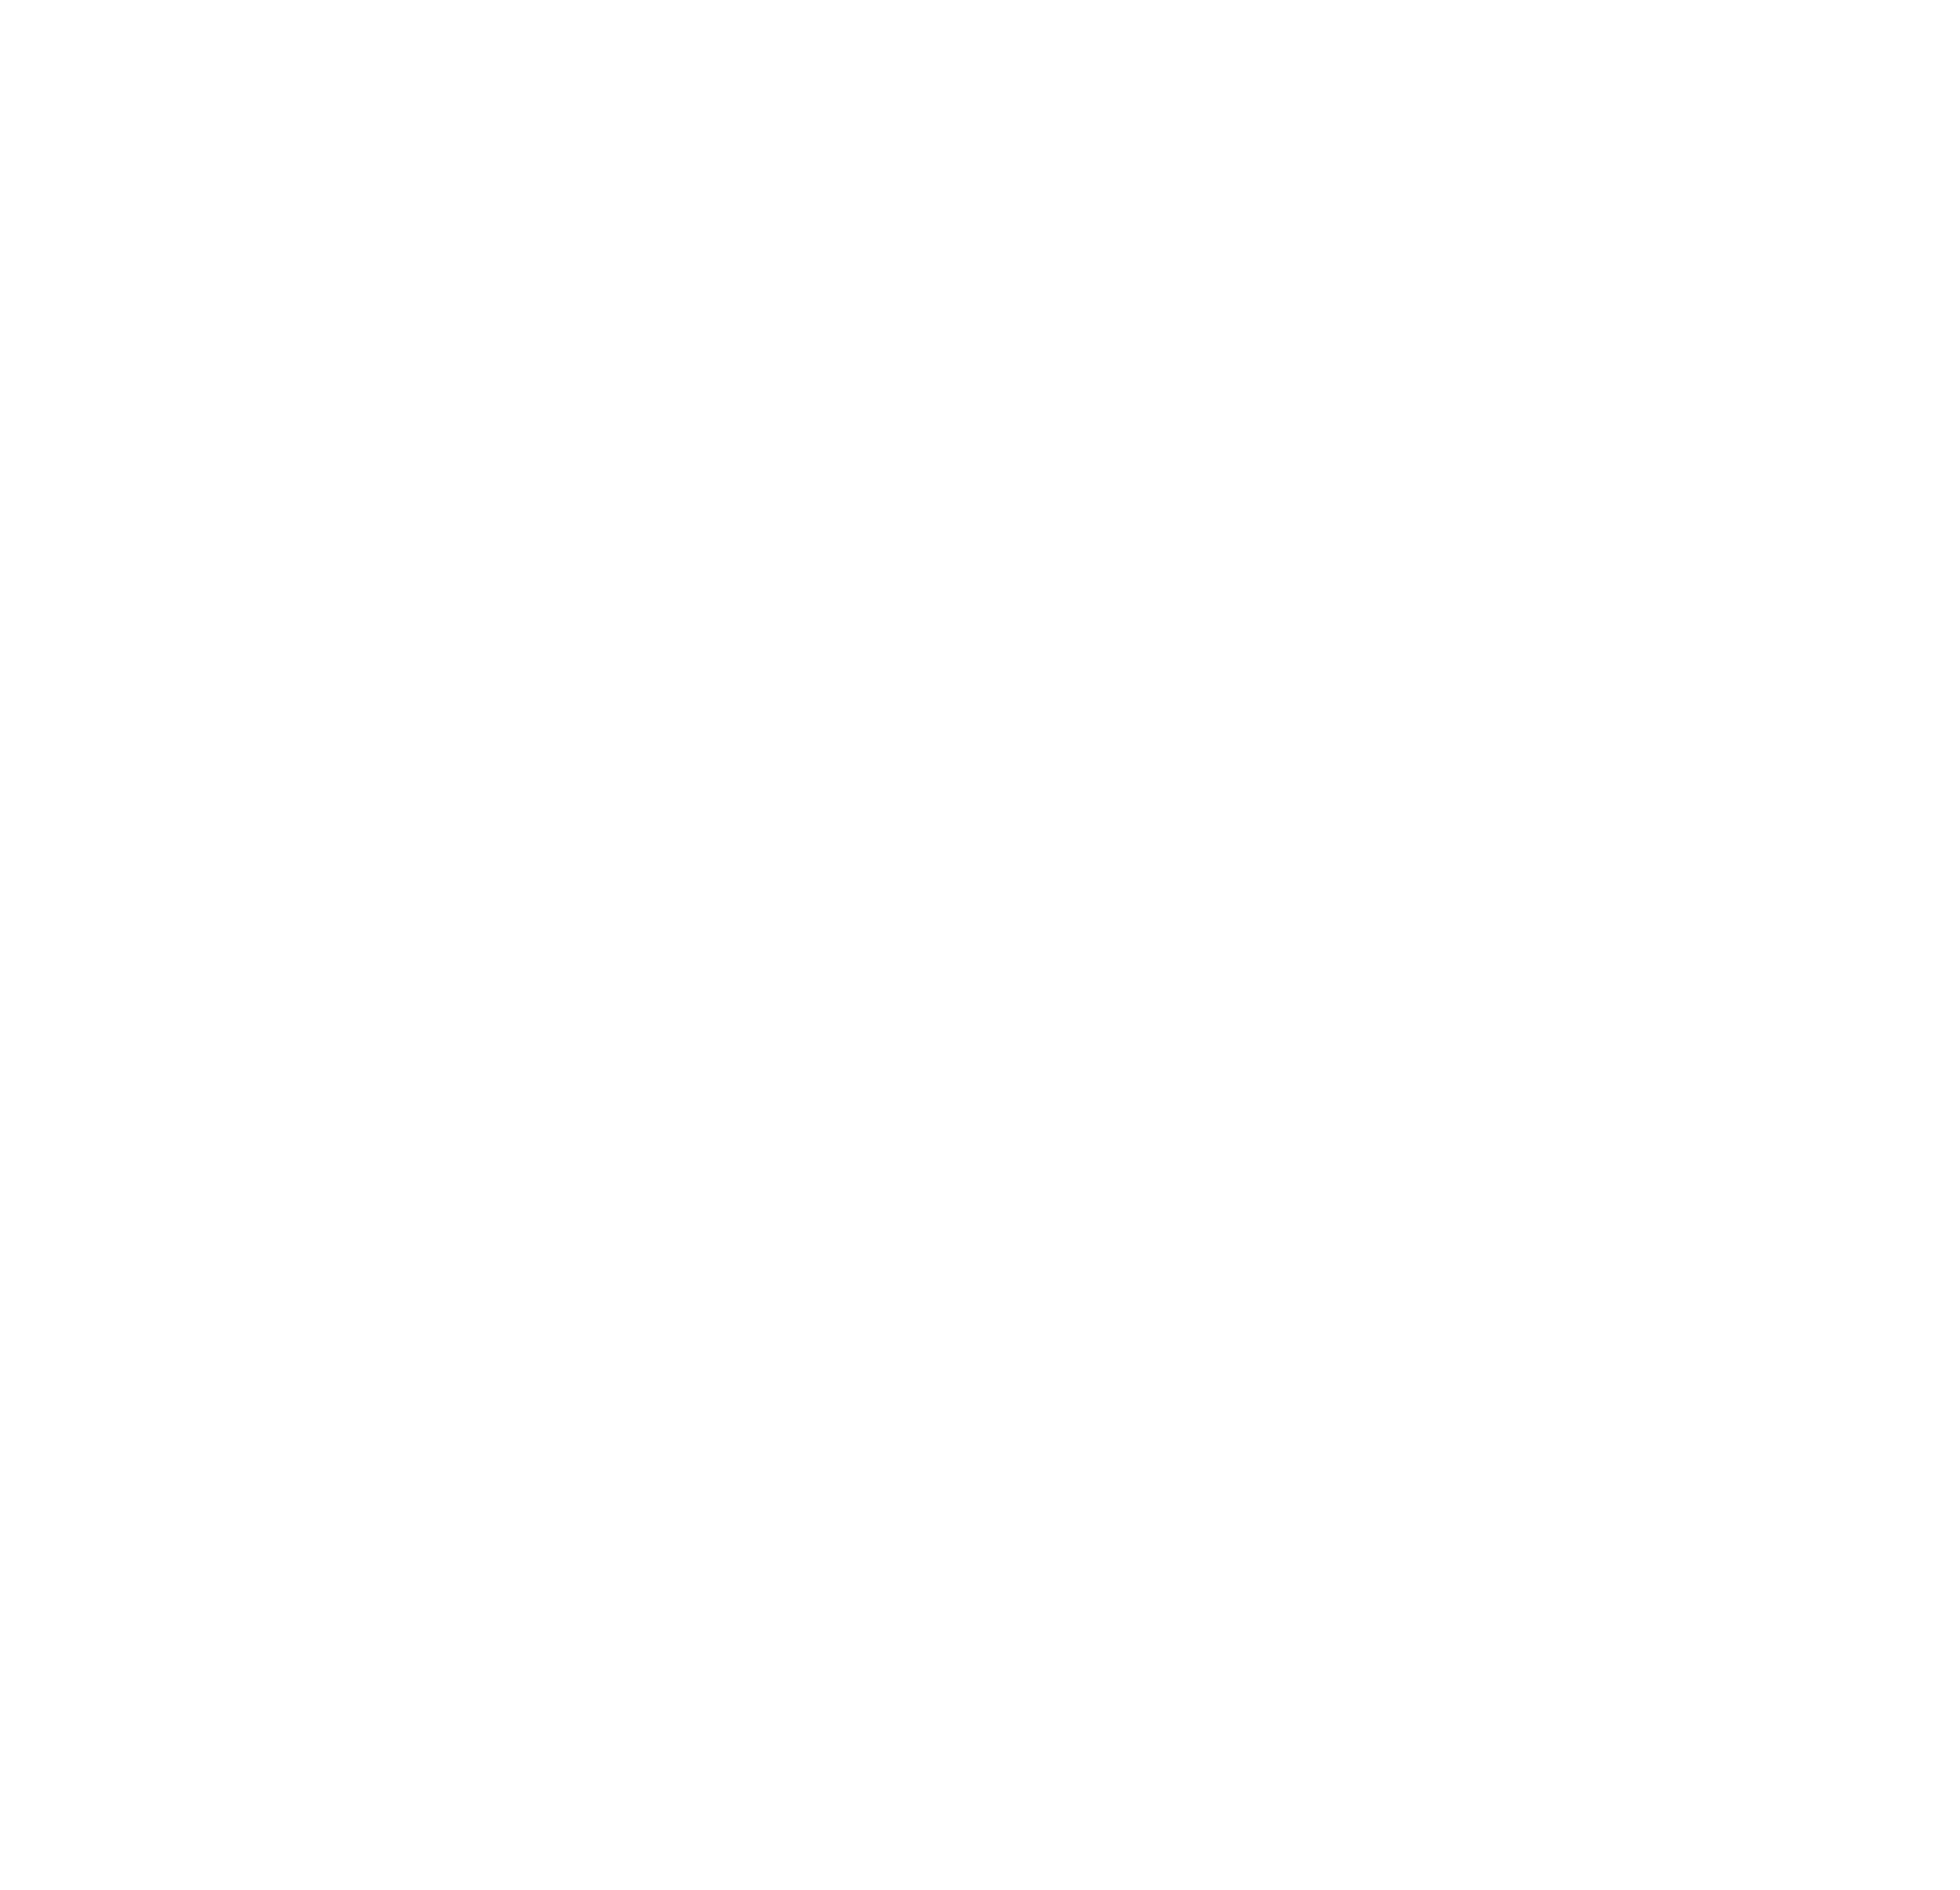 Picture of the CSS logo.